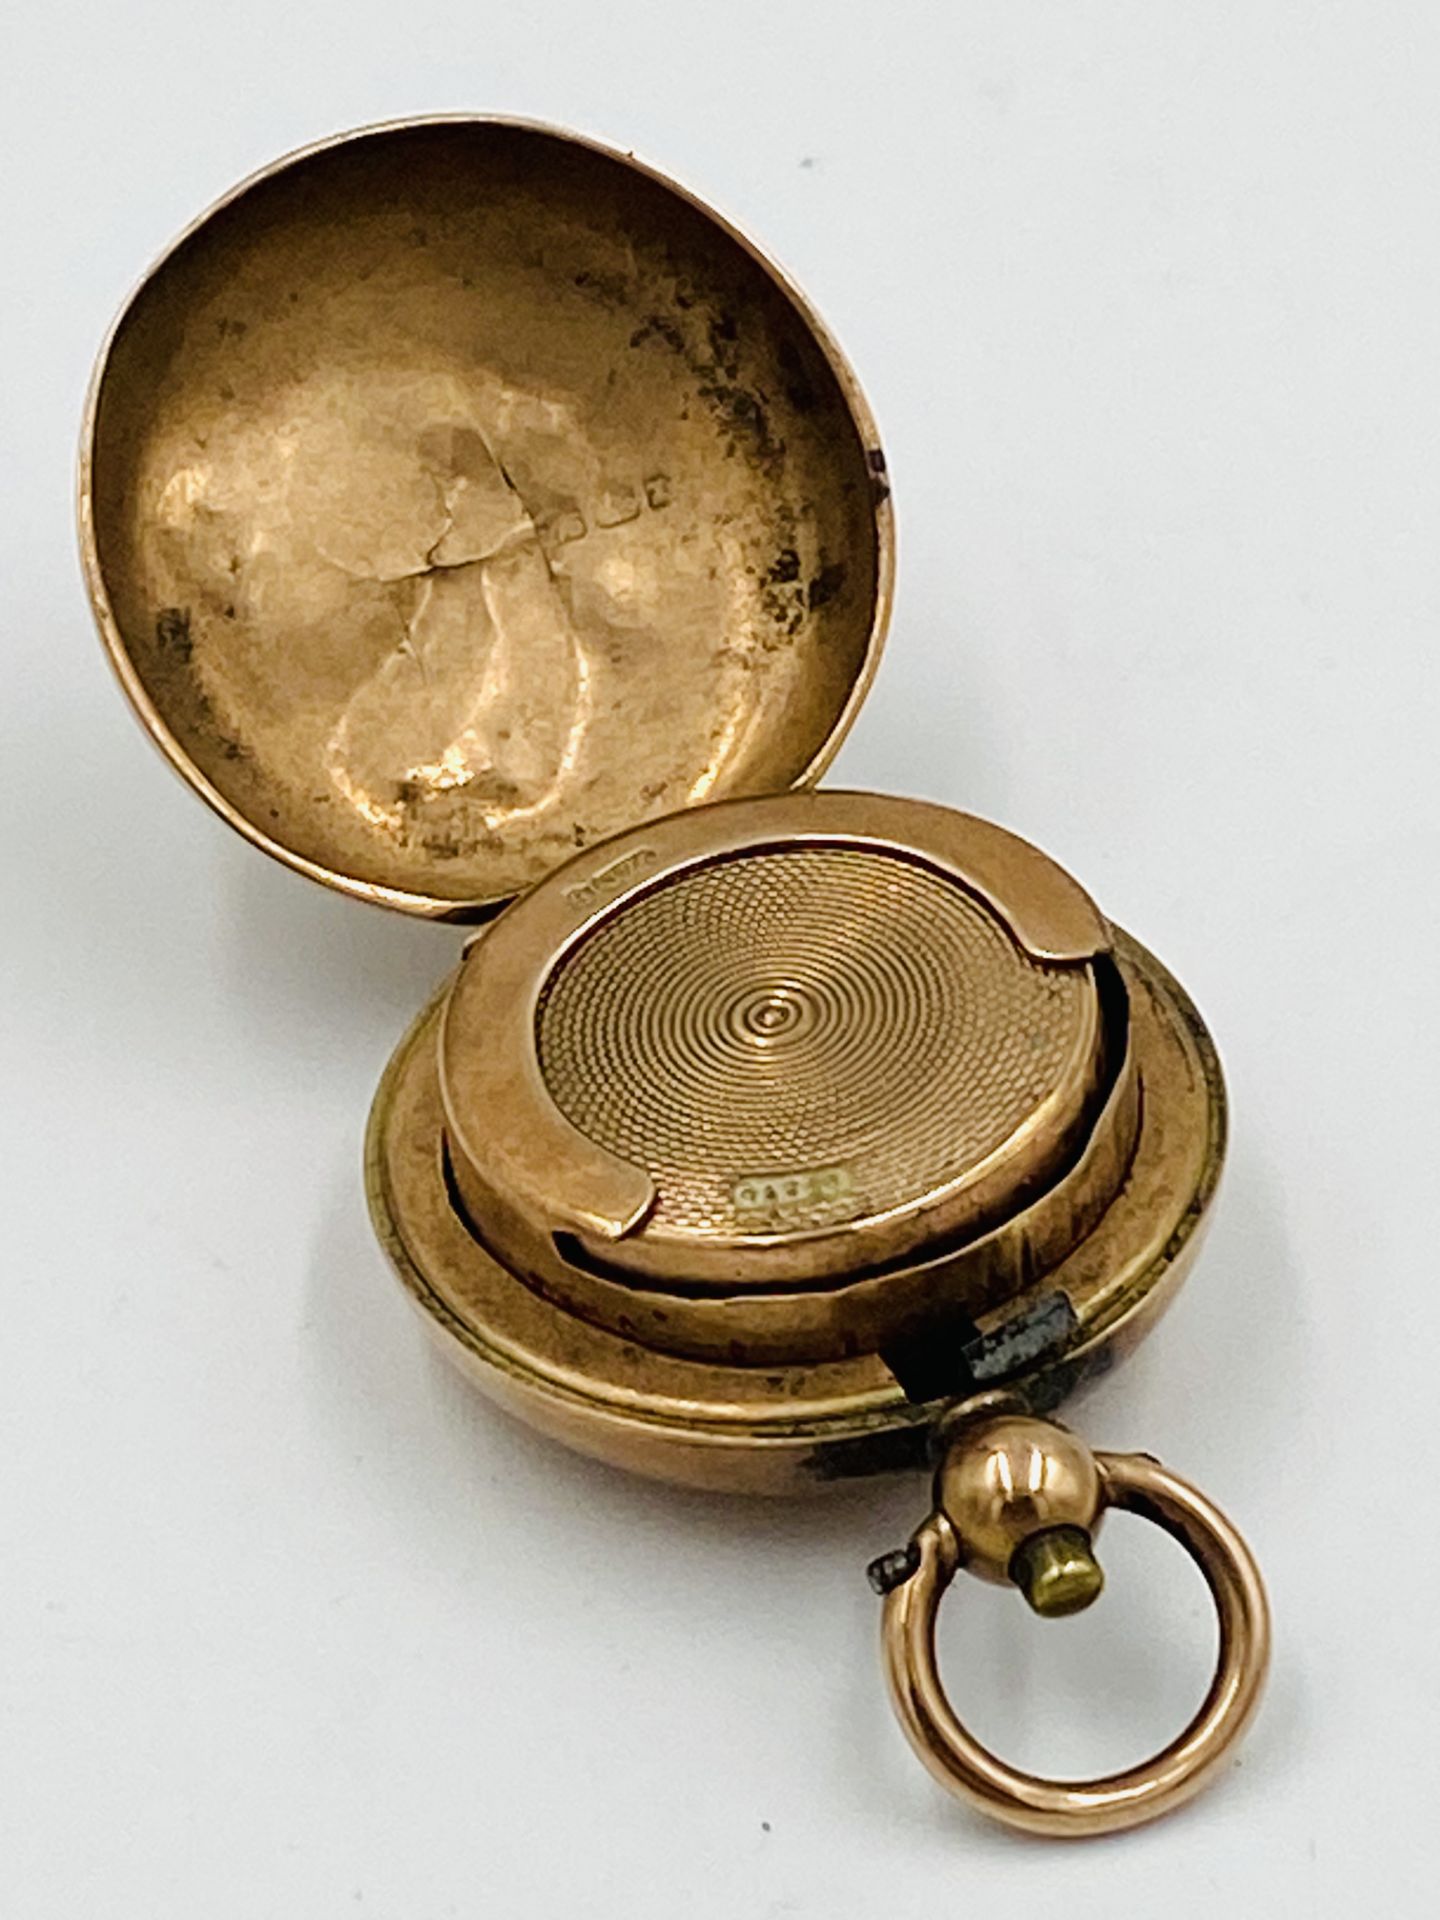 9ct gold coin holder, Birmingham 1899 - Image 2 of 4